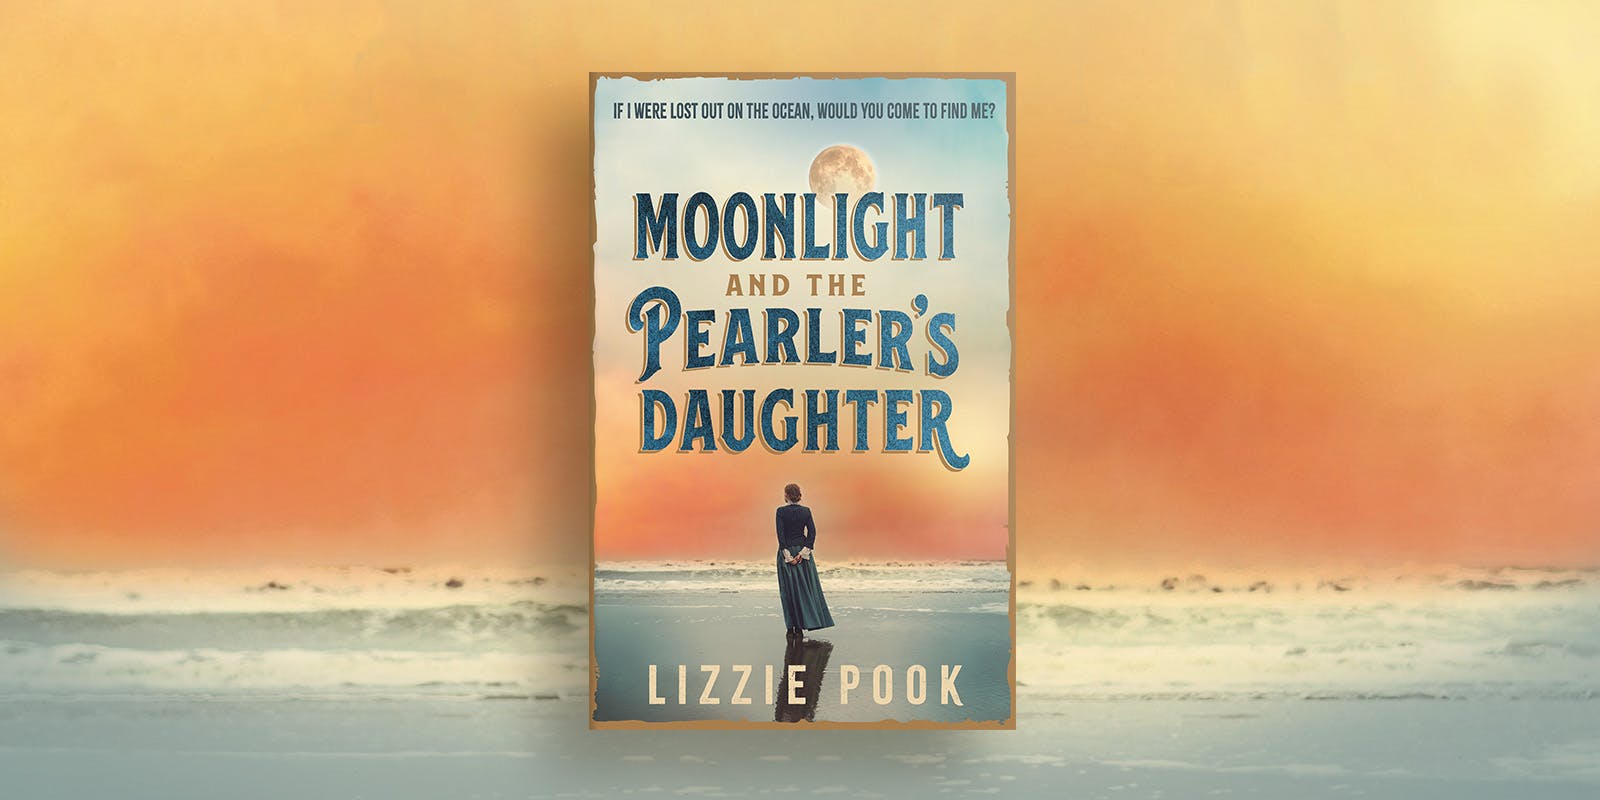 Lizzie Pook reveals the real people behind her characters